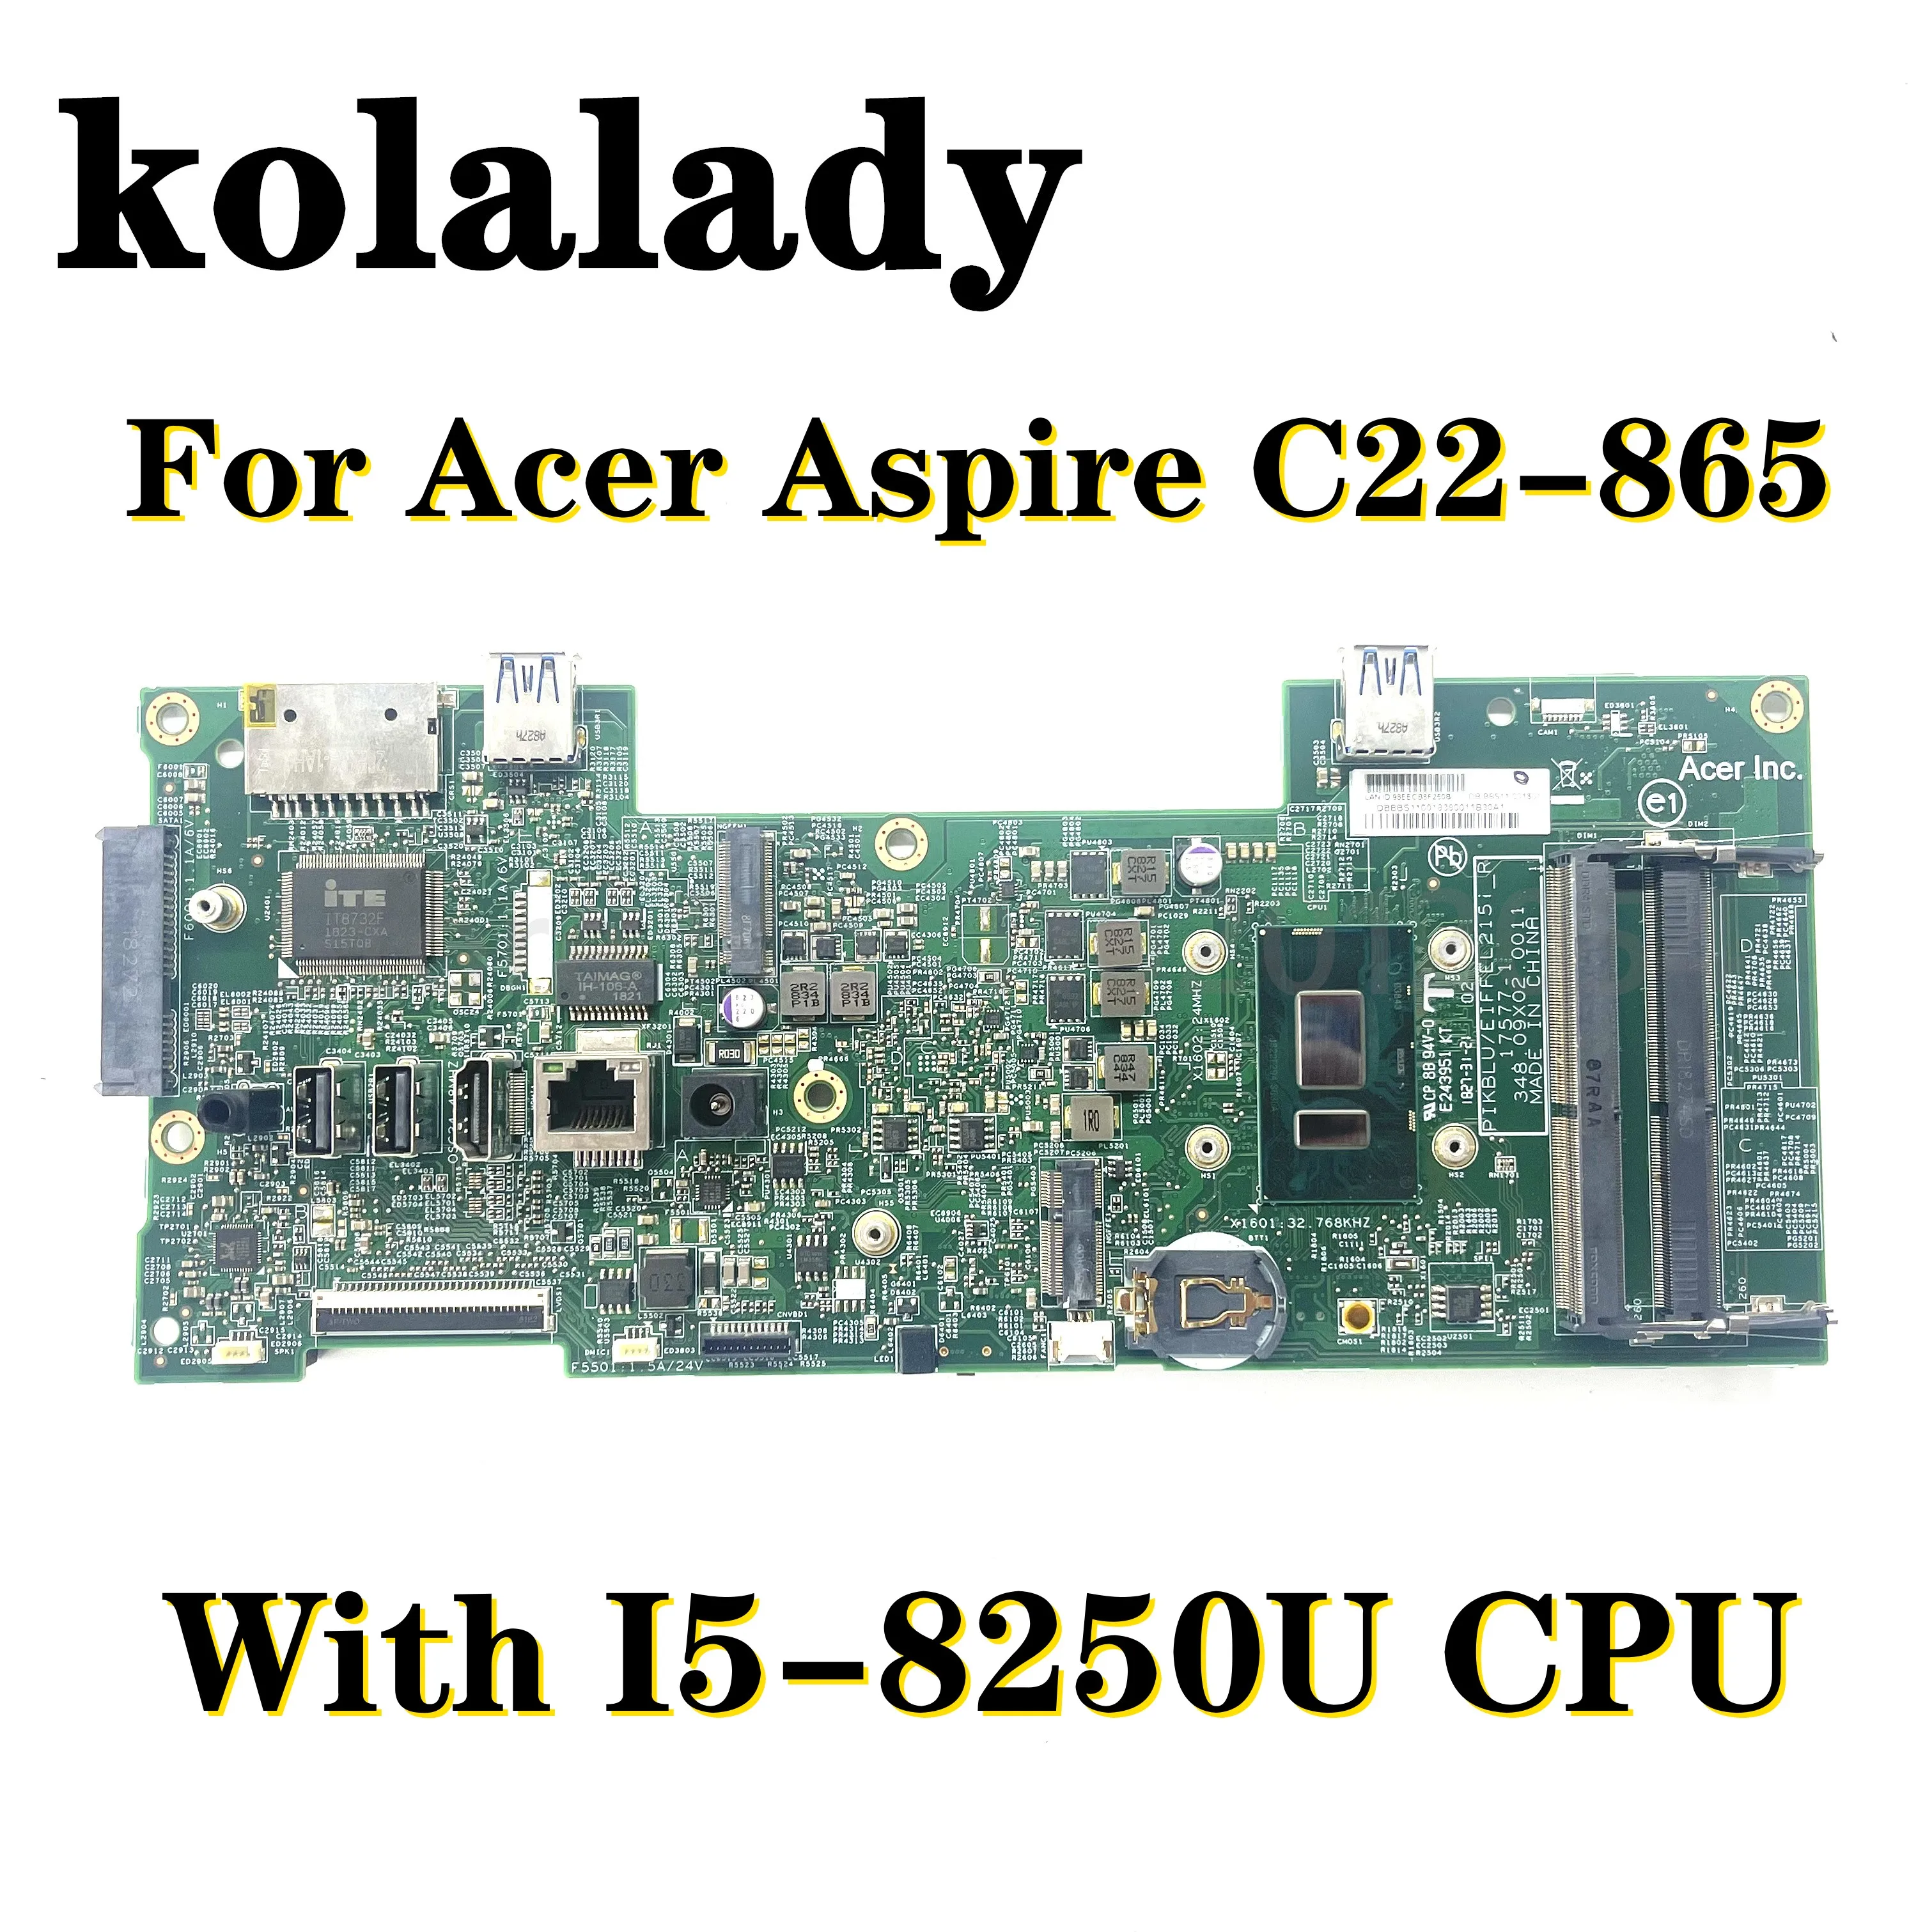 

NEW For Acer ASPIRE C22-865 AIO ALL-IN-ONE Motherboard 17577-1 348.09X03.0011 with CPU I5-8250U SR3LA DDR4 100% Fully Tested